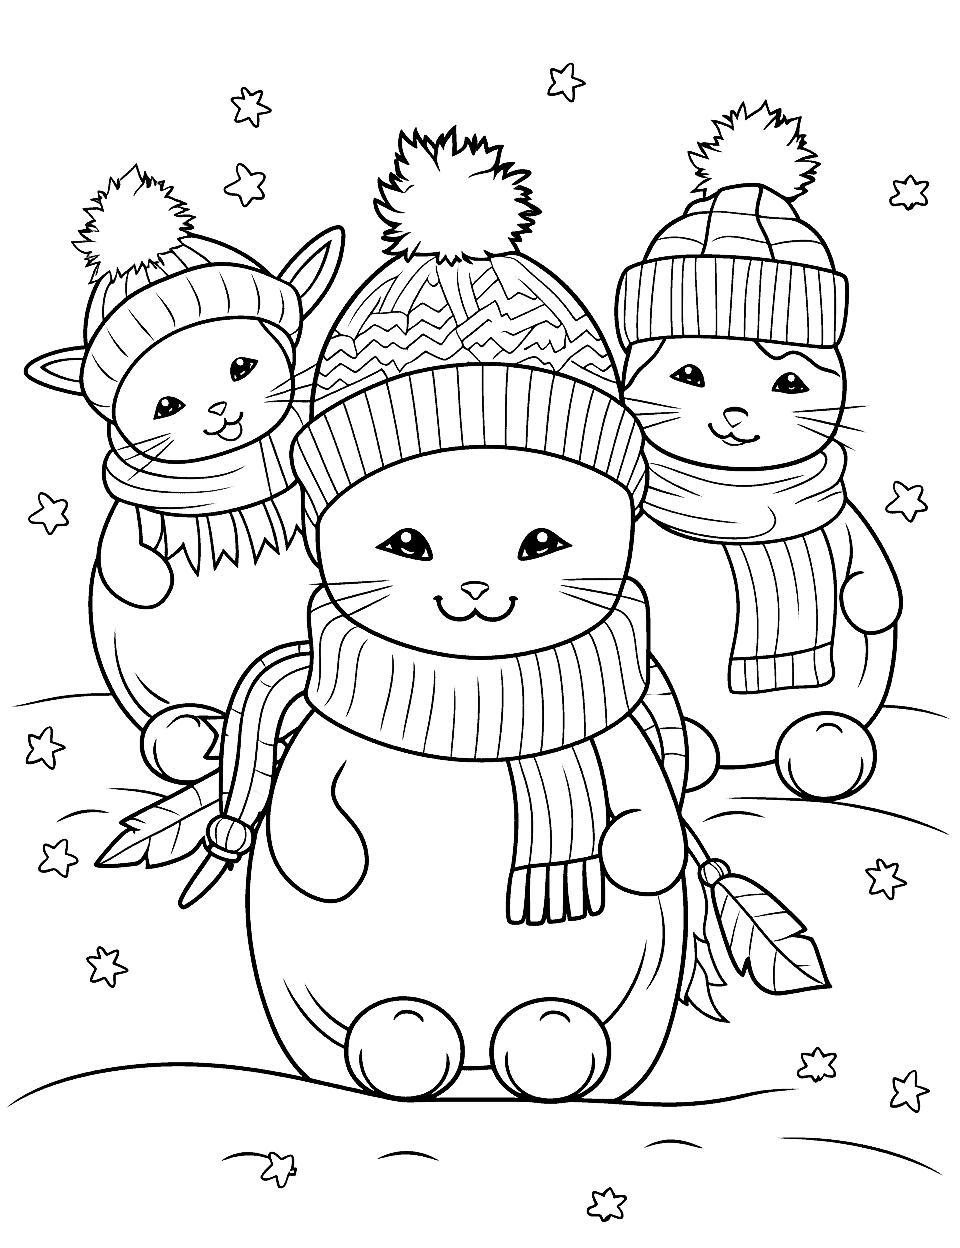 Cats in Winter Wonderland Coloring Page - Several cute cats in cozy sweaters playing in the snow.